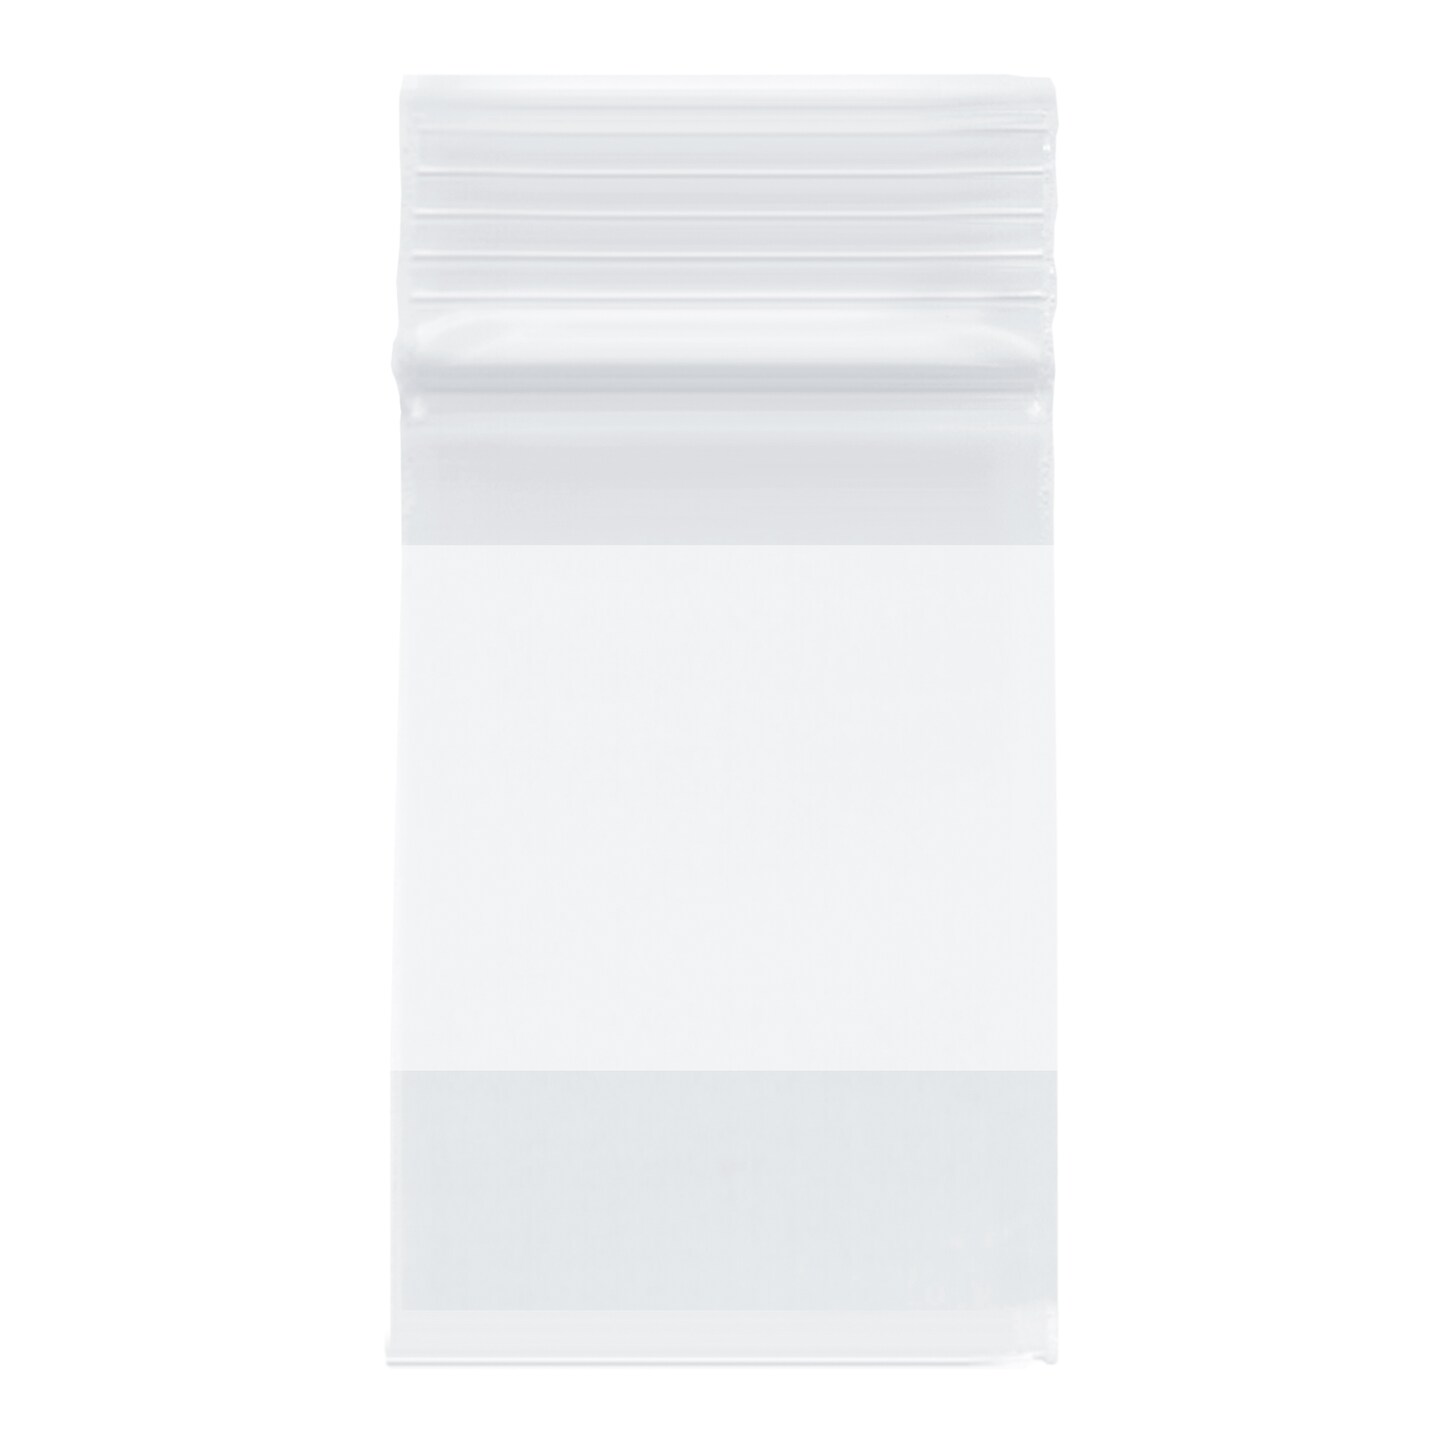 Clear Plastic Zip Bags, 4MIL Heavy Duty Thickness, Reclosable Top